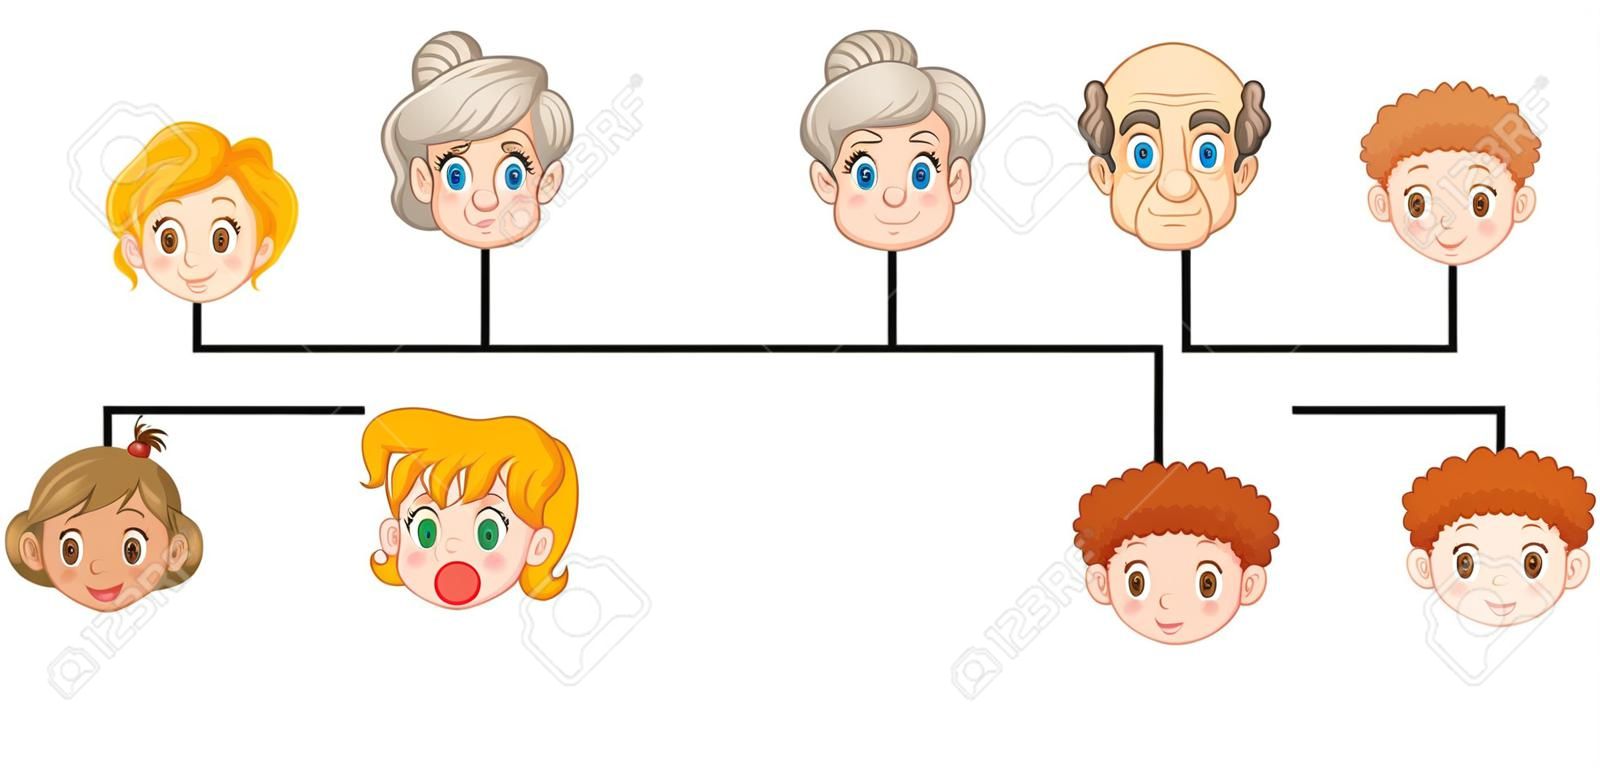 Poster showing a family tree